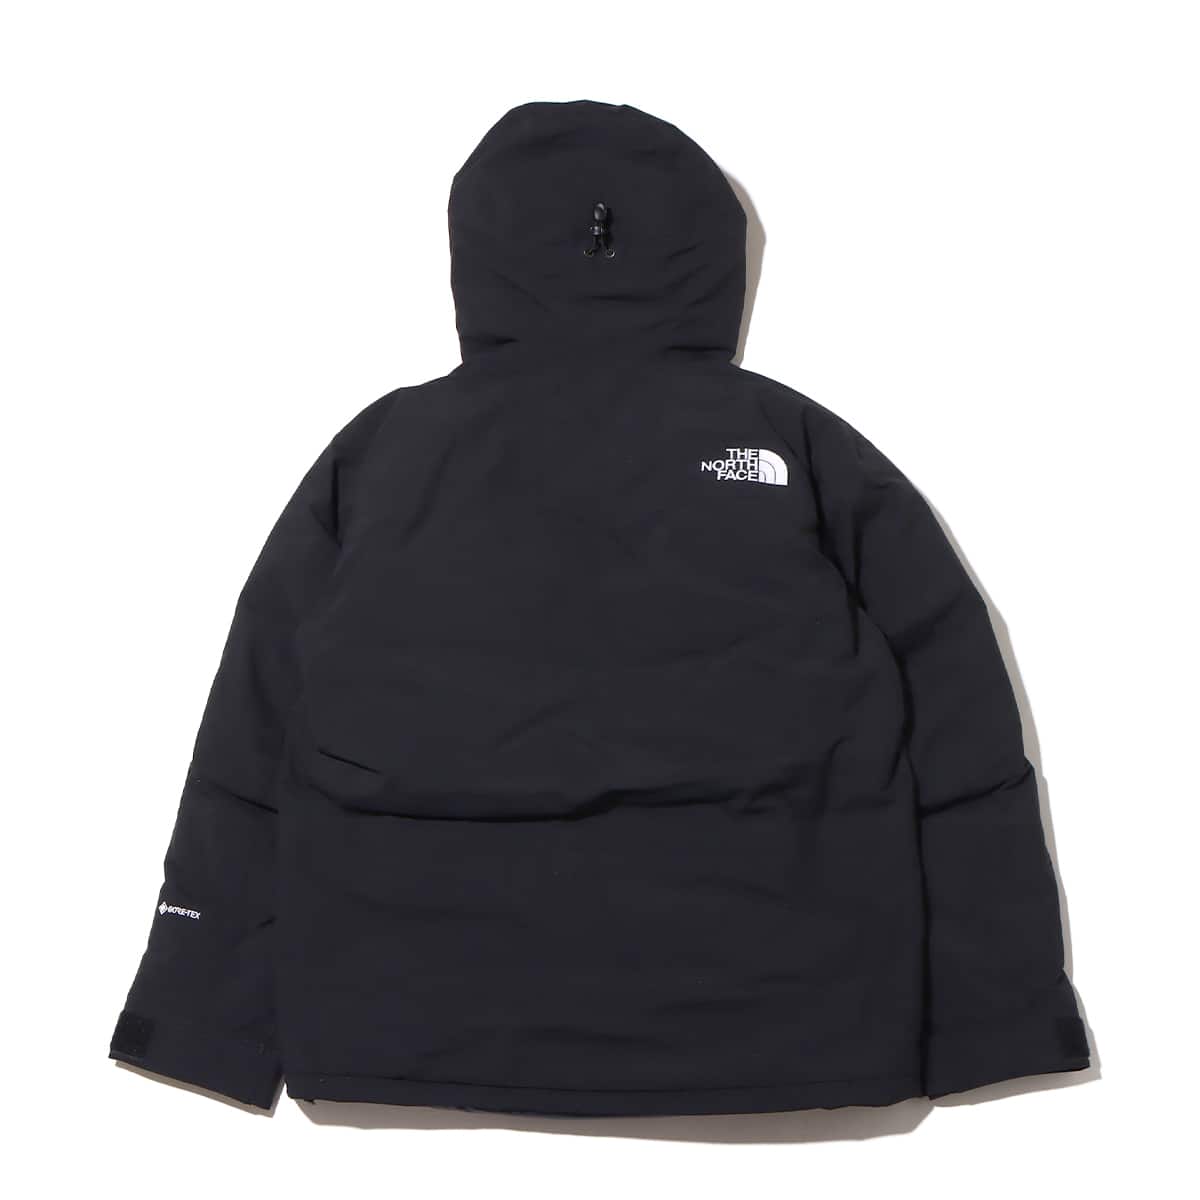 THE NORTH FACE MOUNTAIN DOWN JACKET ブラック